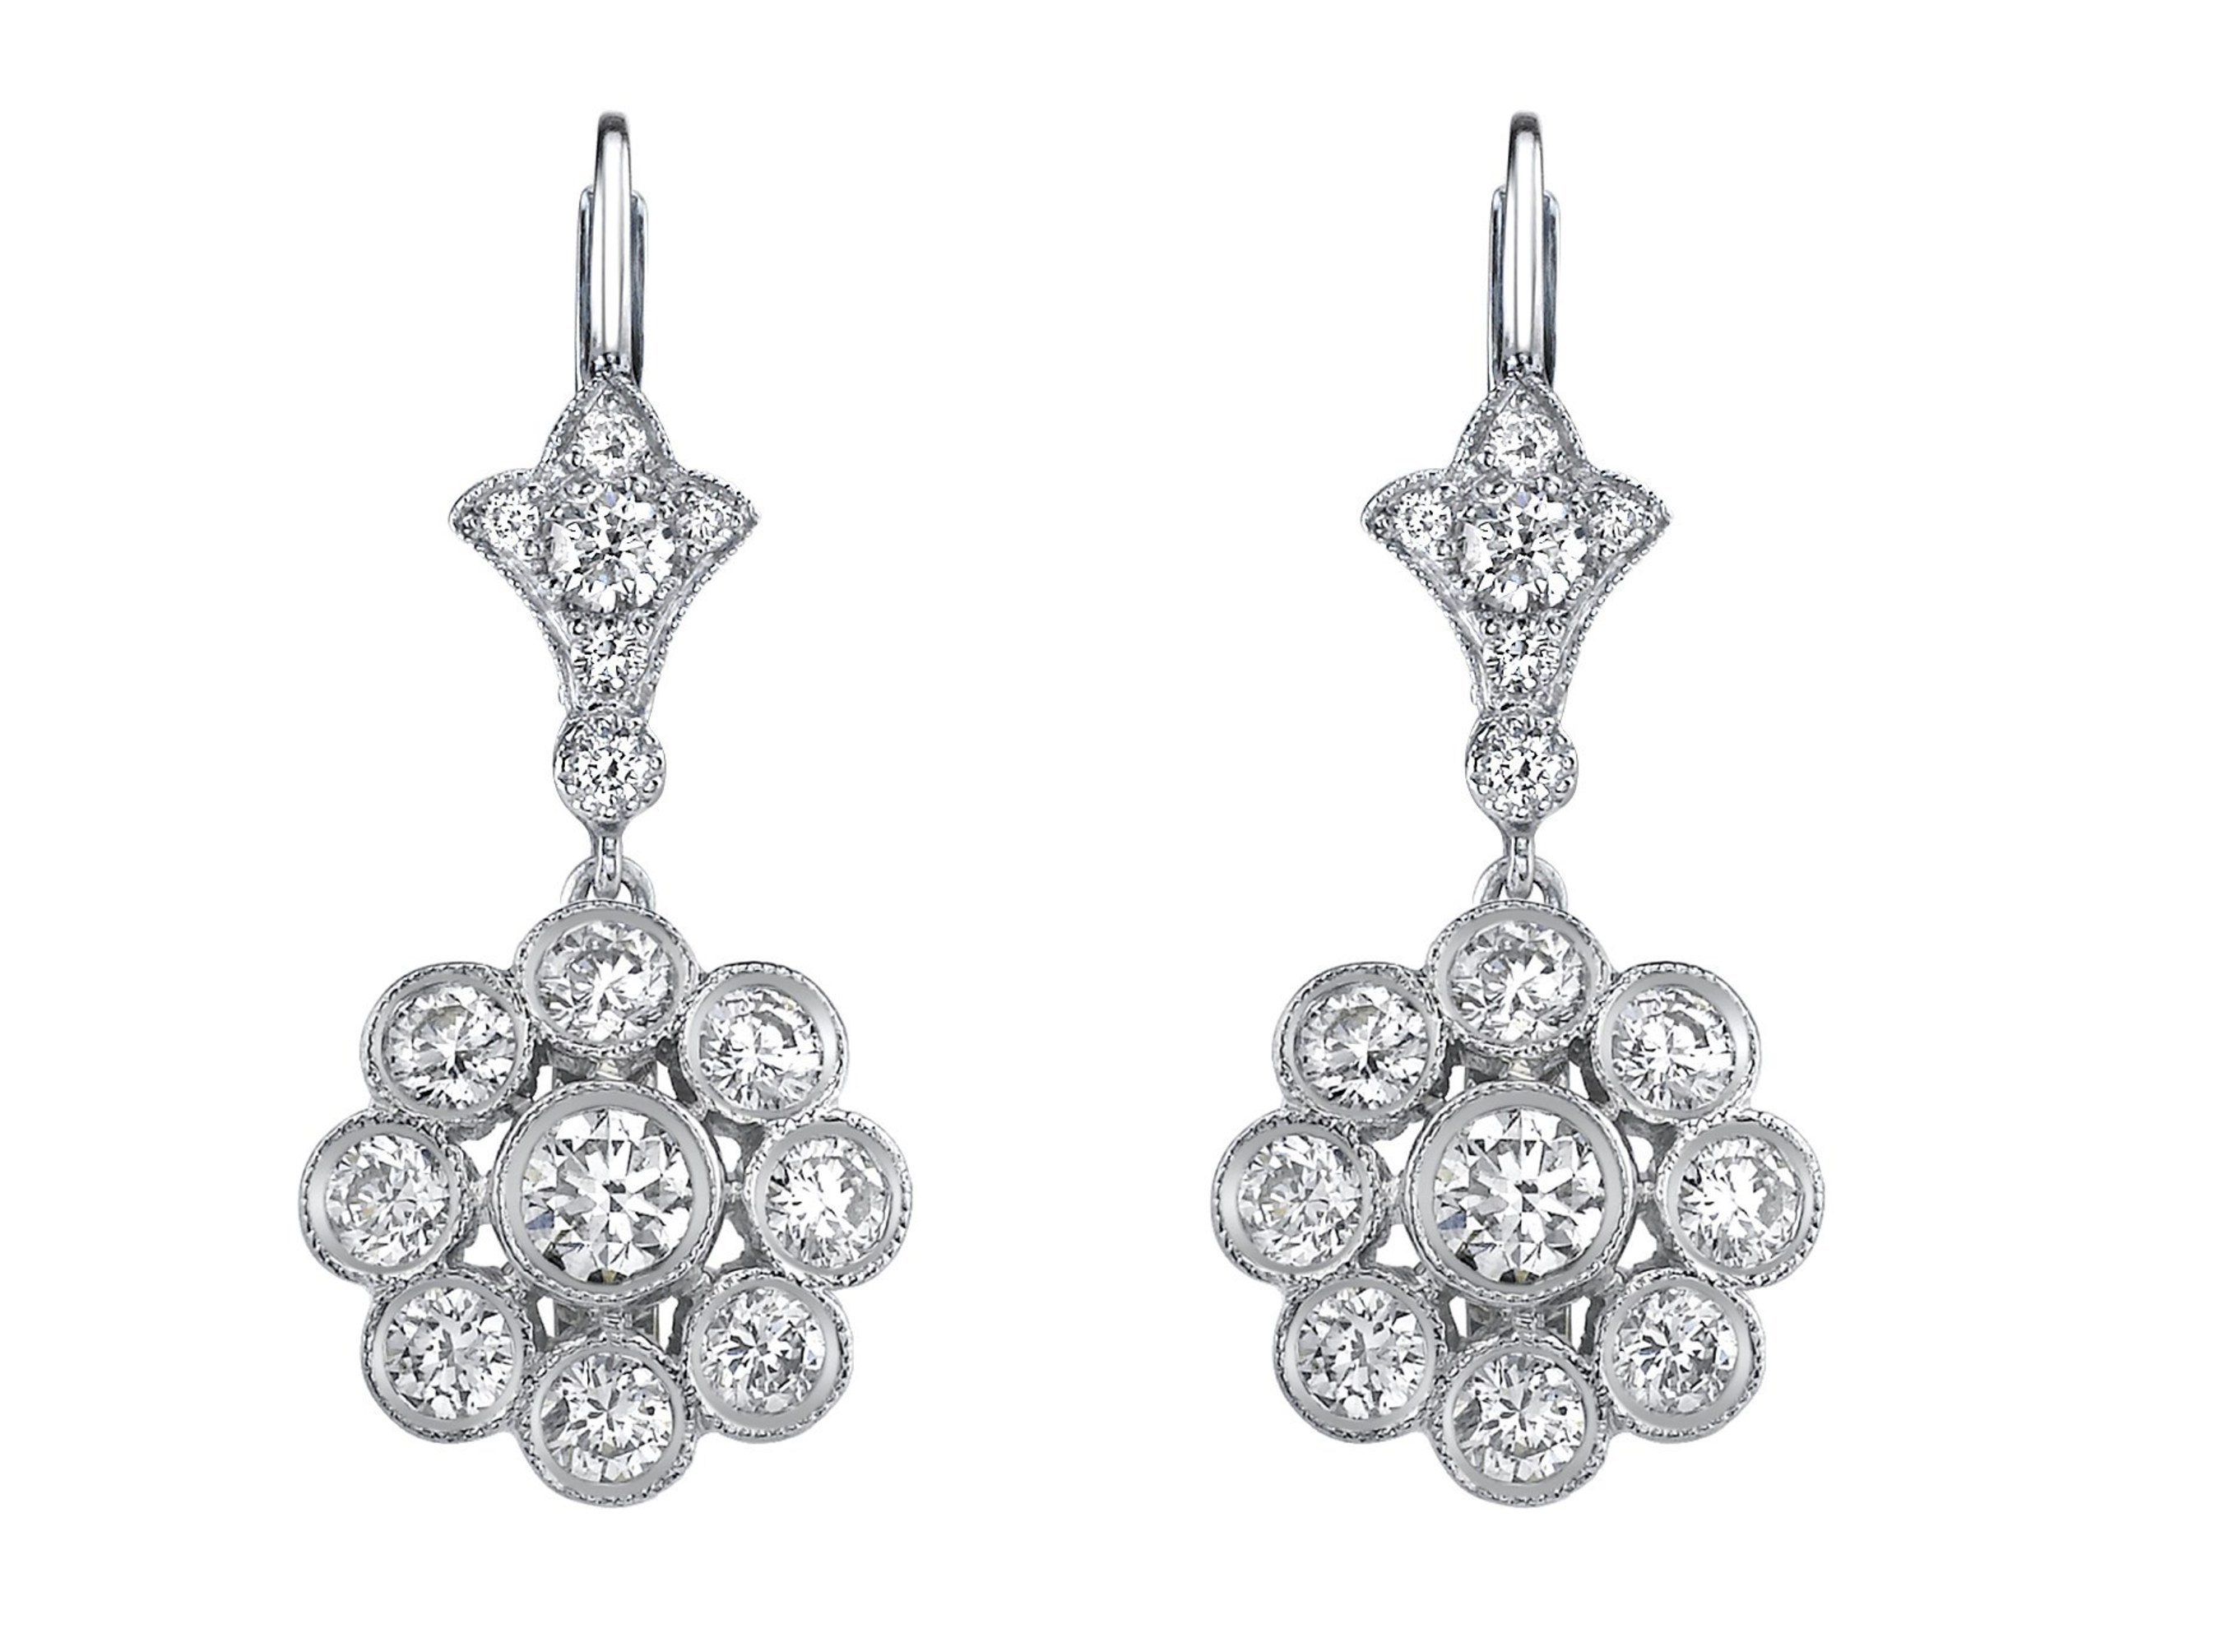 Diamond and platinum flower earrings set with 30 round brilliant-cut diamonds from a fleur-de-lis diamond top. Hand crafted, signed and designed by Neil Lane.